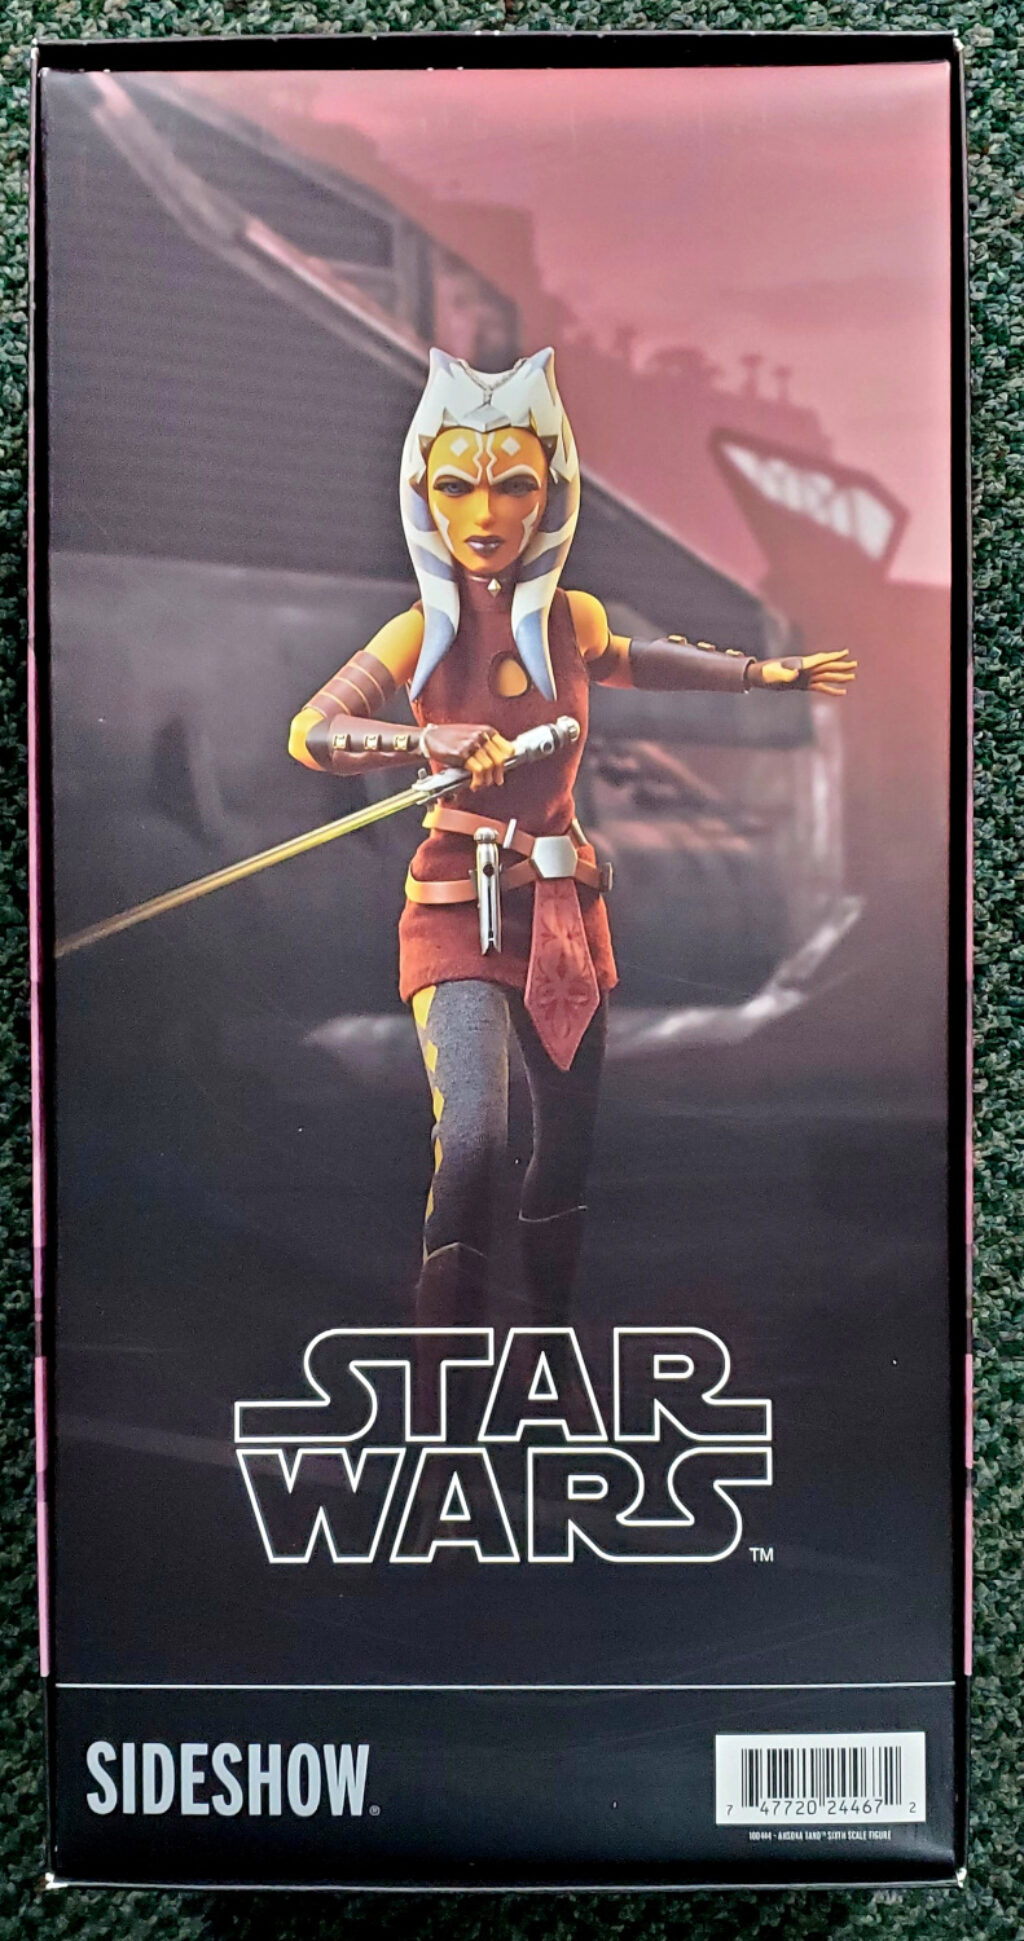 Sideshow Collectibles Star Wars: The Clone Wars Ahsoka Tano 1:6 Scale Figure - In Stock 1